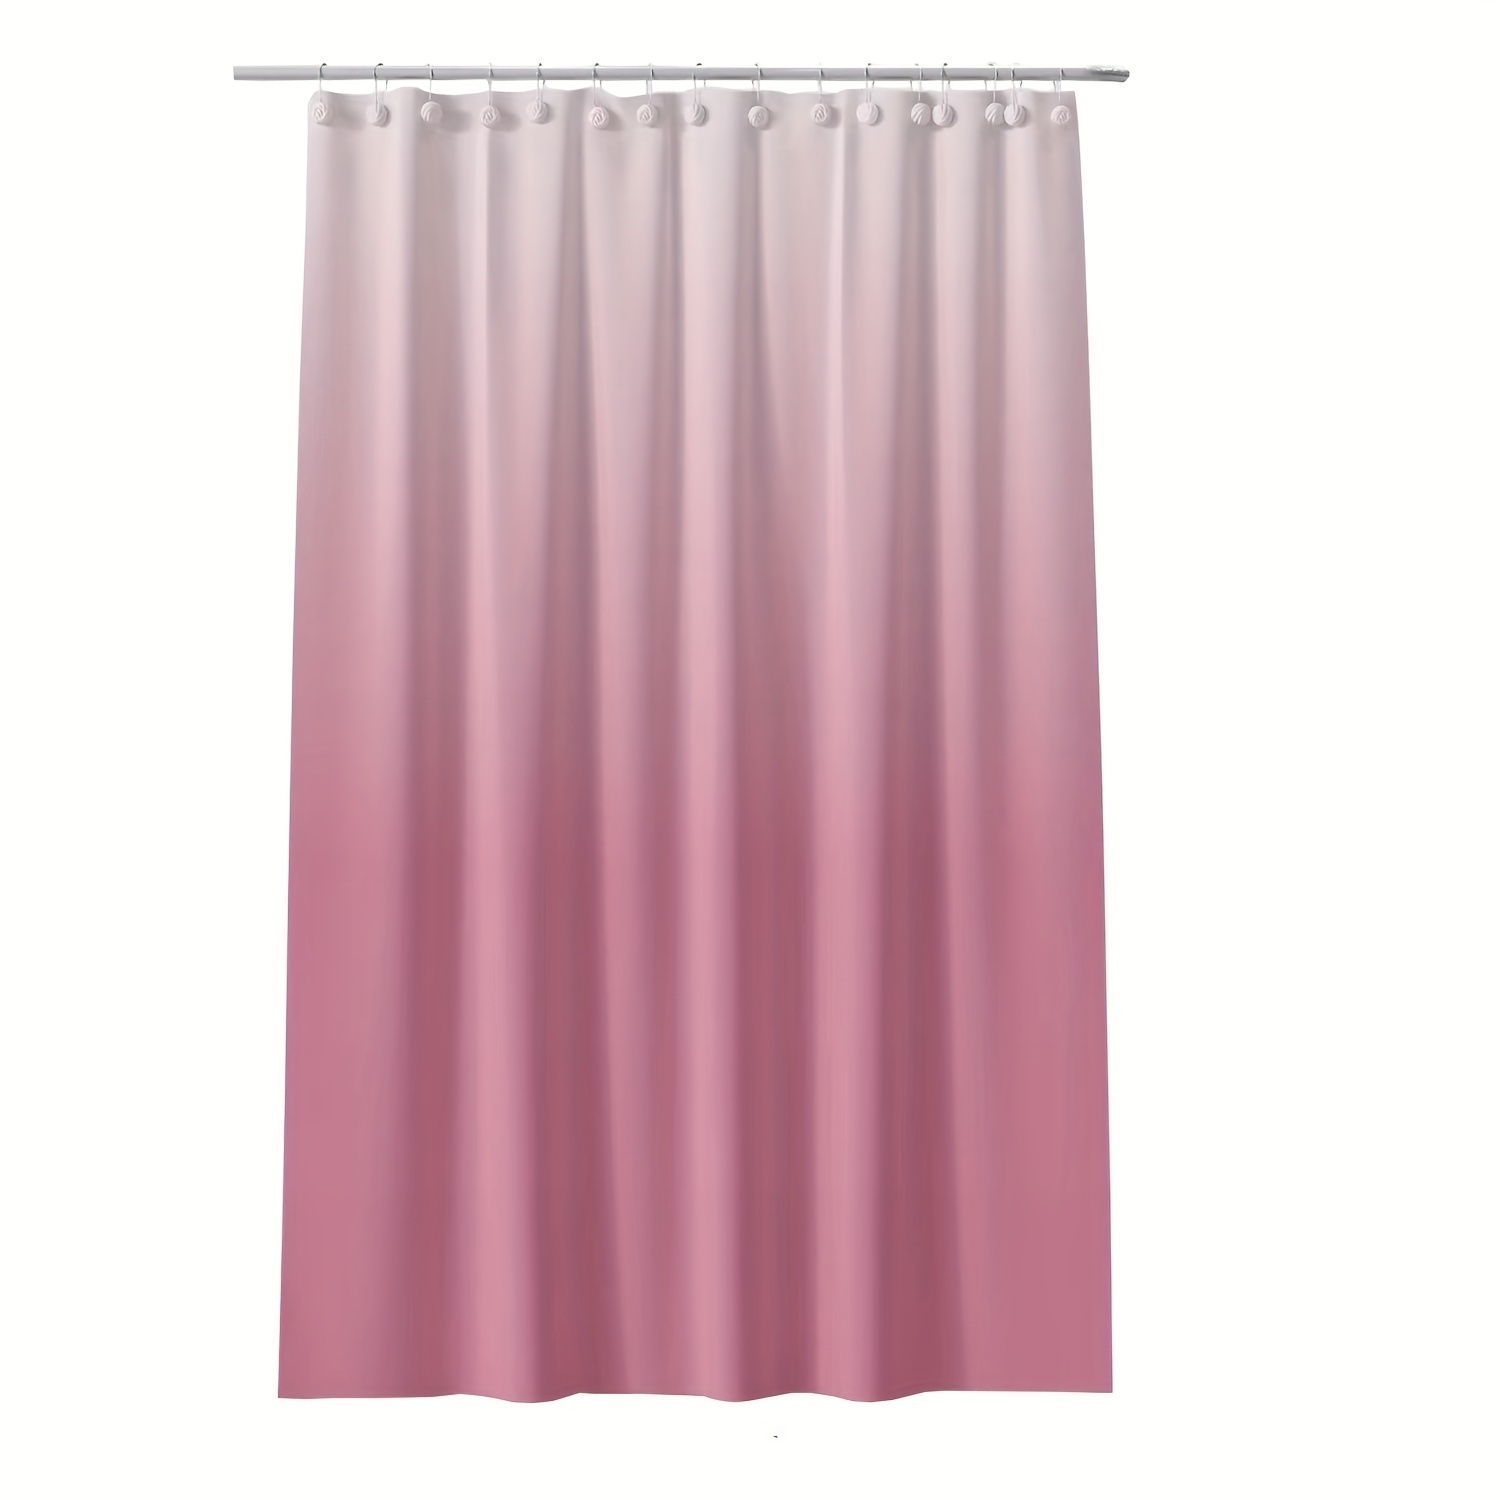 

Yusehy Waterproof Gradient Pink Peva Shower Curtain Liner 71x71 Inches With Rust-proof Metal Grommets And Weighted Bottom, Romantic Theme, Easy Clean, All-season Bathroom Decor - 1pc